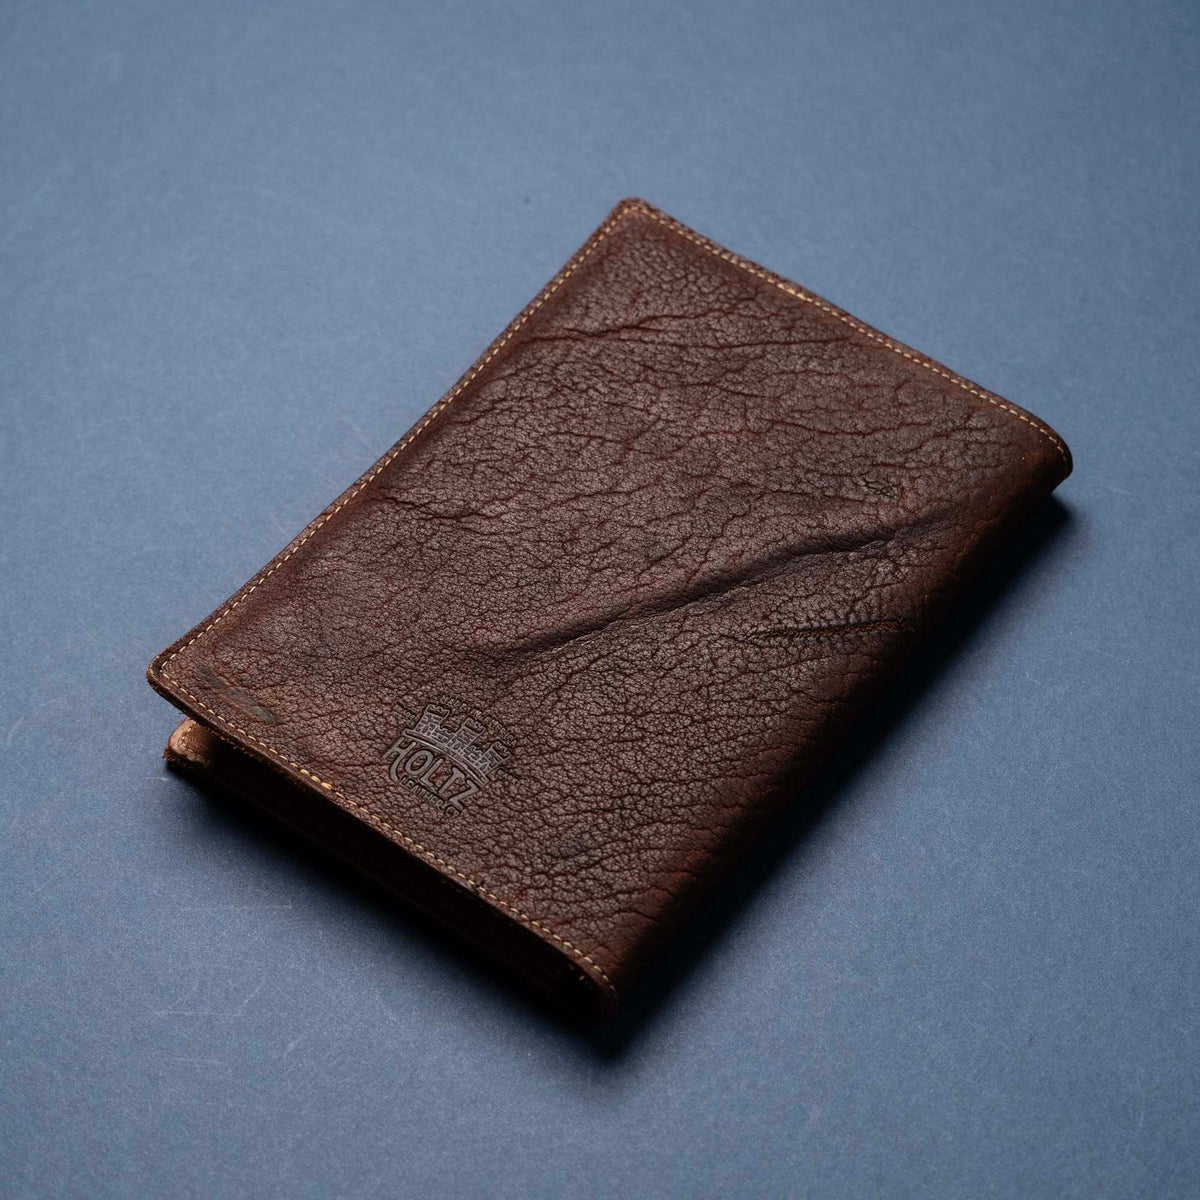 Personalized Leather Journal with Shrunken Bison Leather Cover - The Scholar